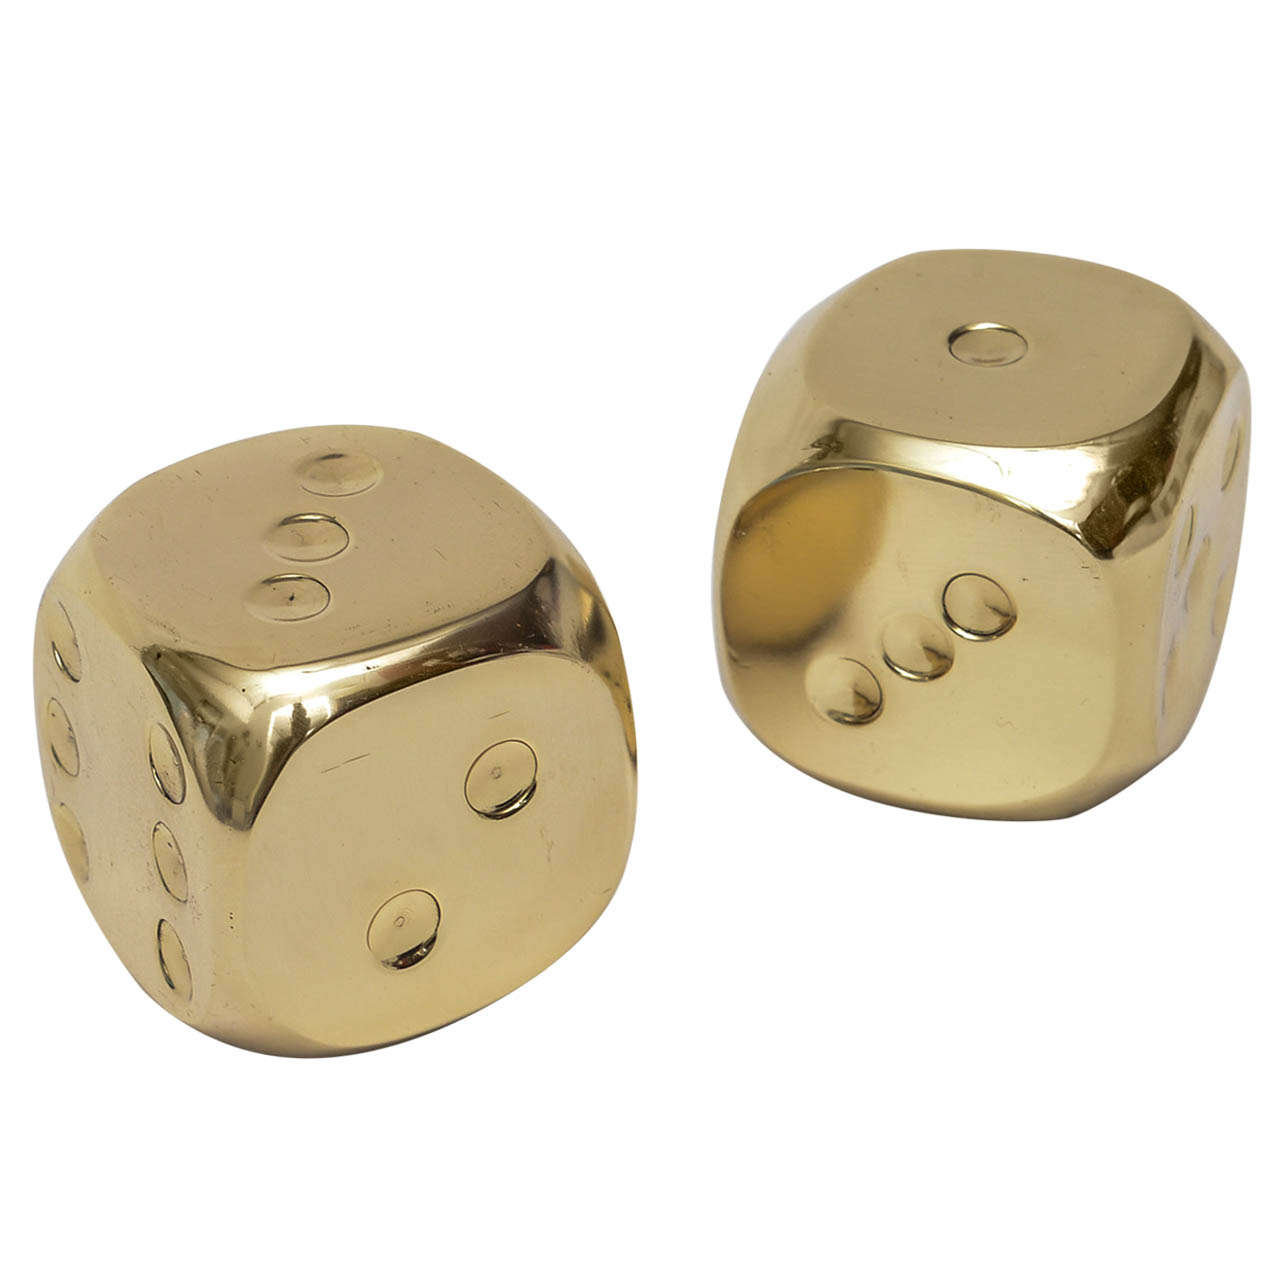 Pair of Polished Brass Dice/ SATURDAY SALE